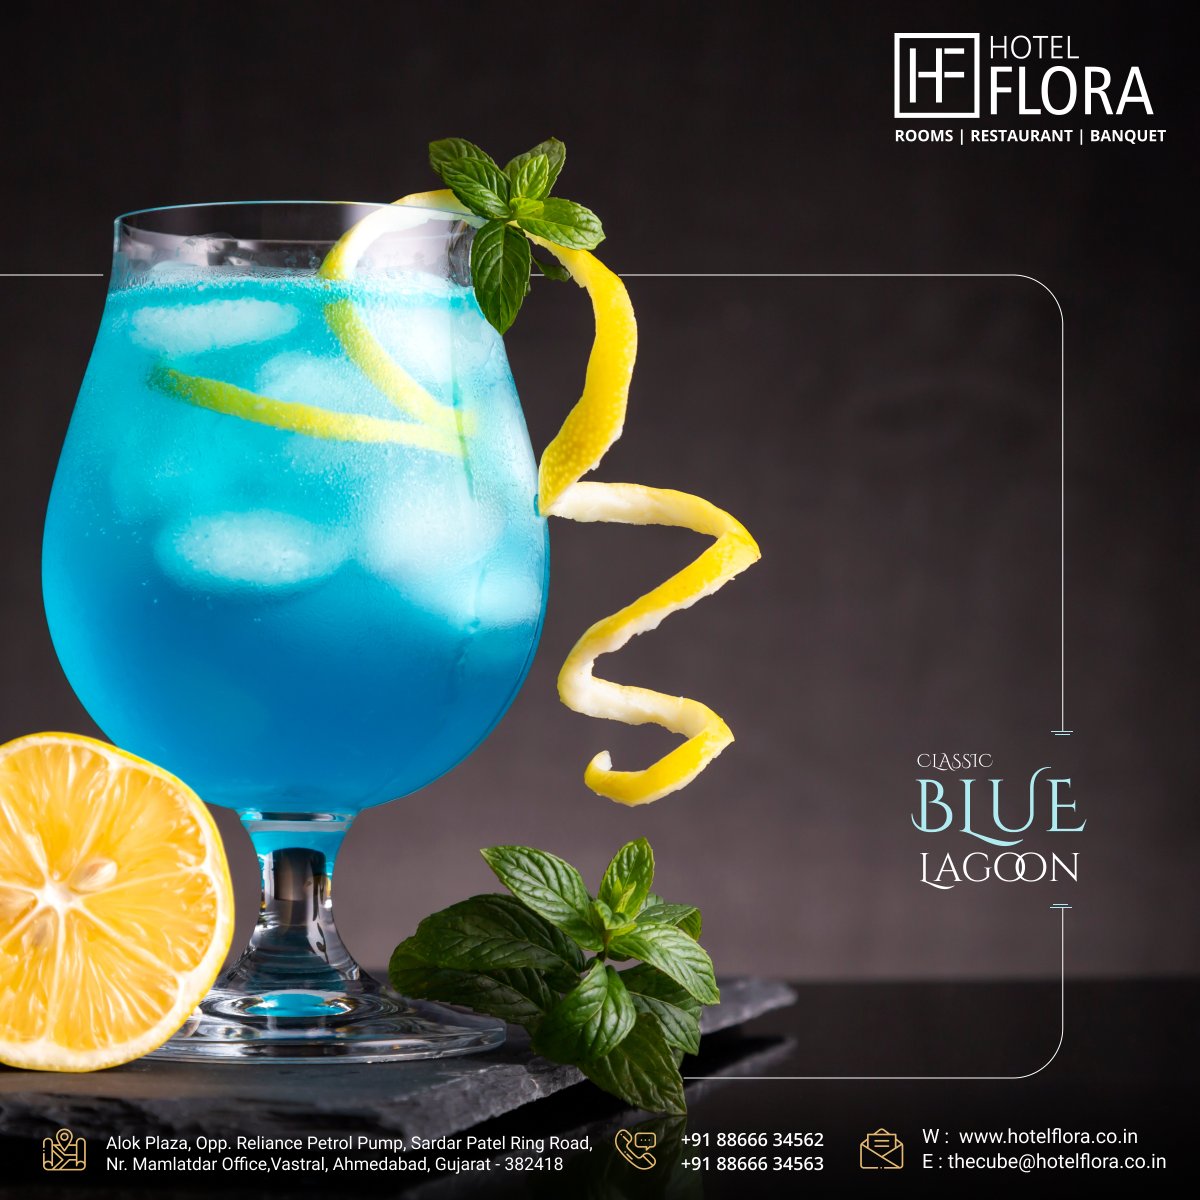 Classic Blue Lagoon

#Hotelflora #Restaurant #Banquet #Rooms #Conference #Vastral #Ahmedabad #food #events #appetizer #mocktail #punjabi #chinese #continental #seminarhalls #ringceremony